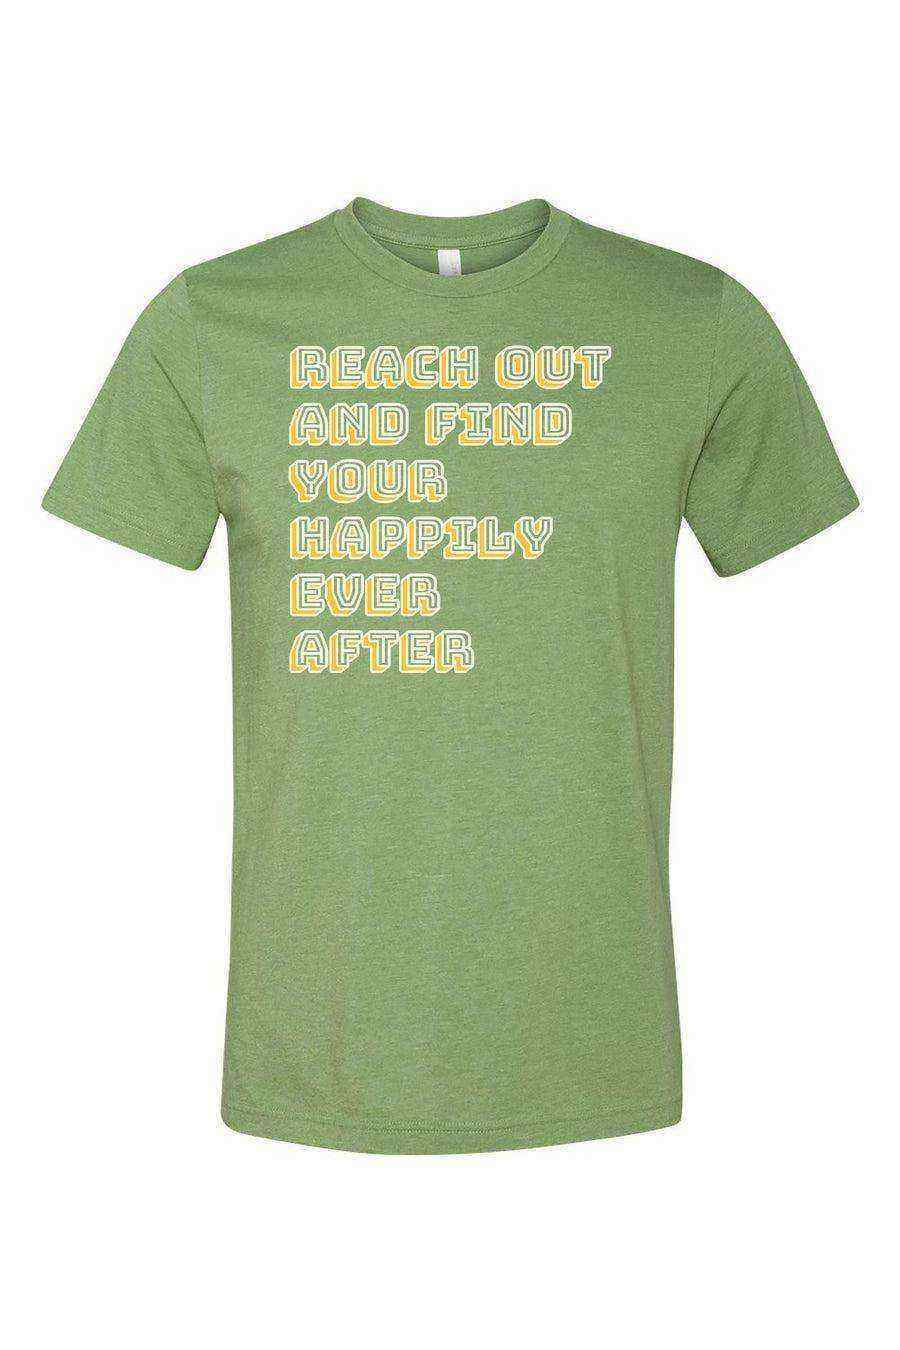 Happily Ever After Shirt | Happily Ever After Lyrics Shirt - Dylan's Tees